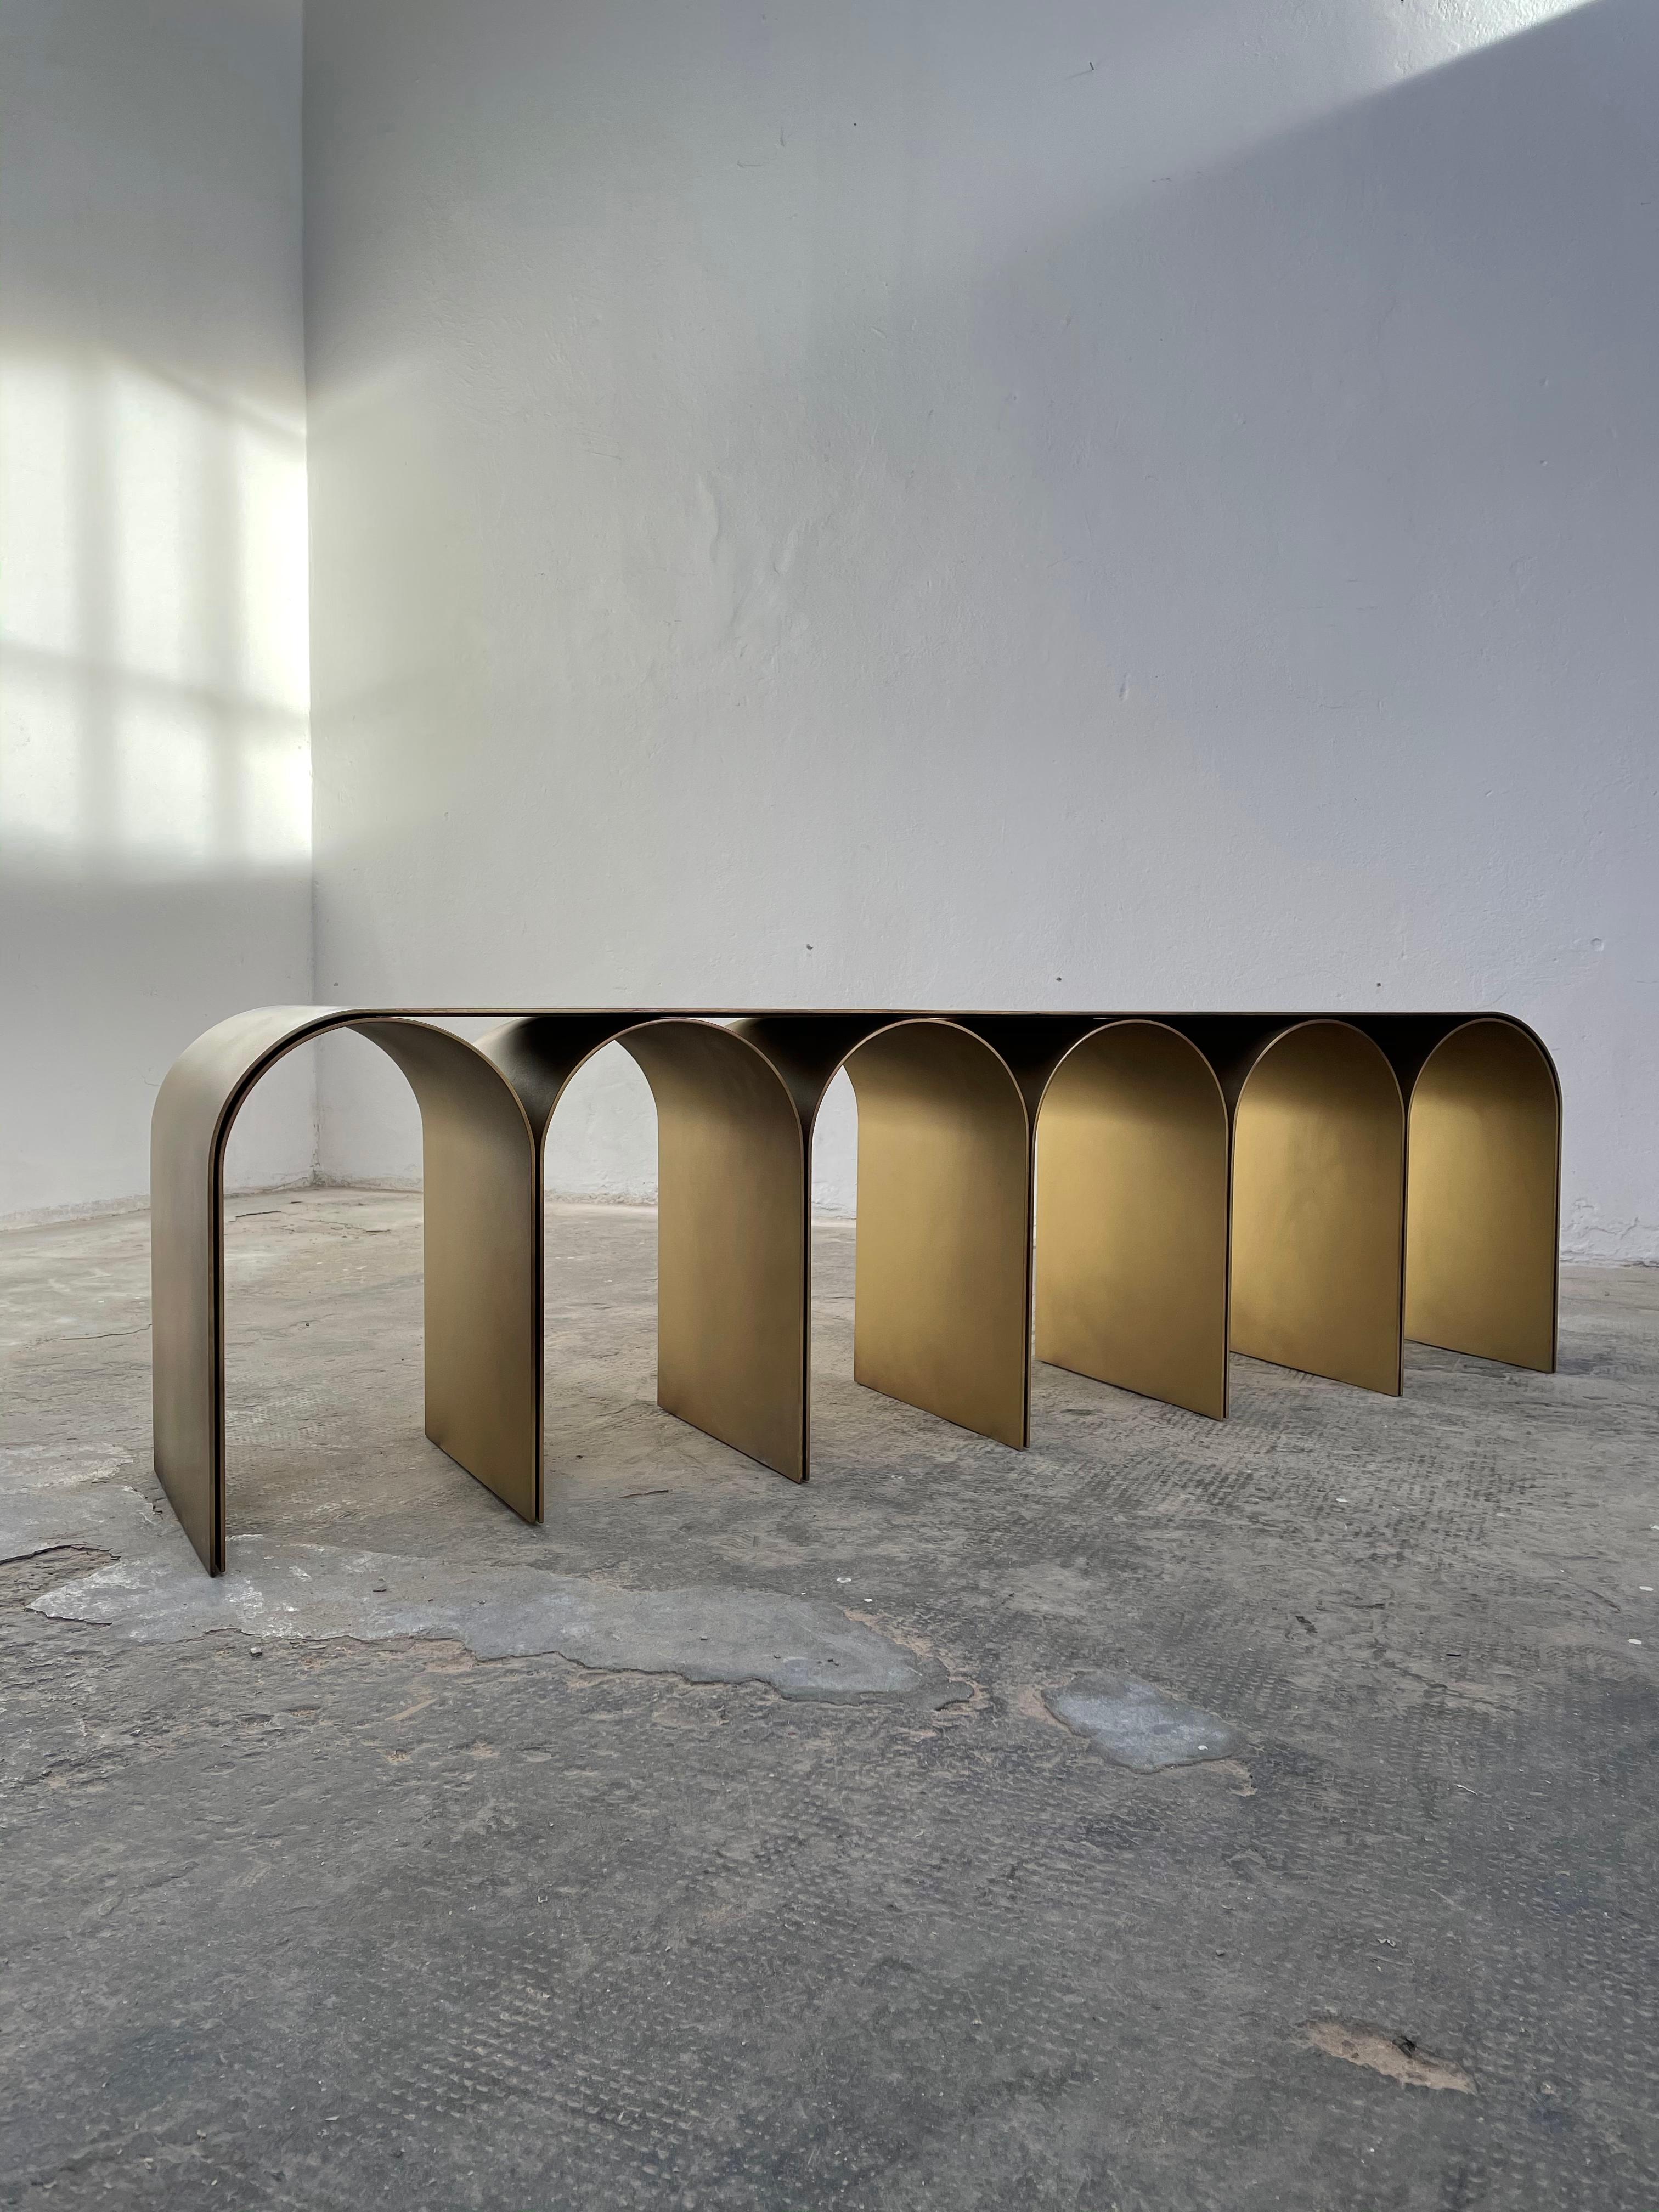 Steek gold arch bench by Pietro Franceschini
Sold exclusively by Galerie Philia
Materials: Steel
Finishes available: Brass finish, satin, blackened
Dimensions: W 155 x L 33 x 43cm
Manufacturer: Prinzivalli

Also available in steel brass